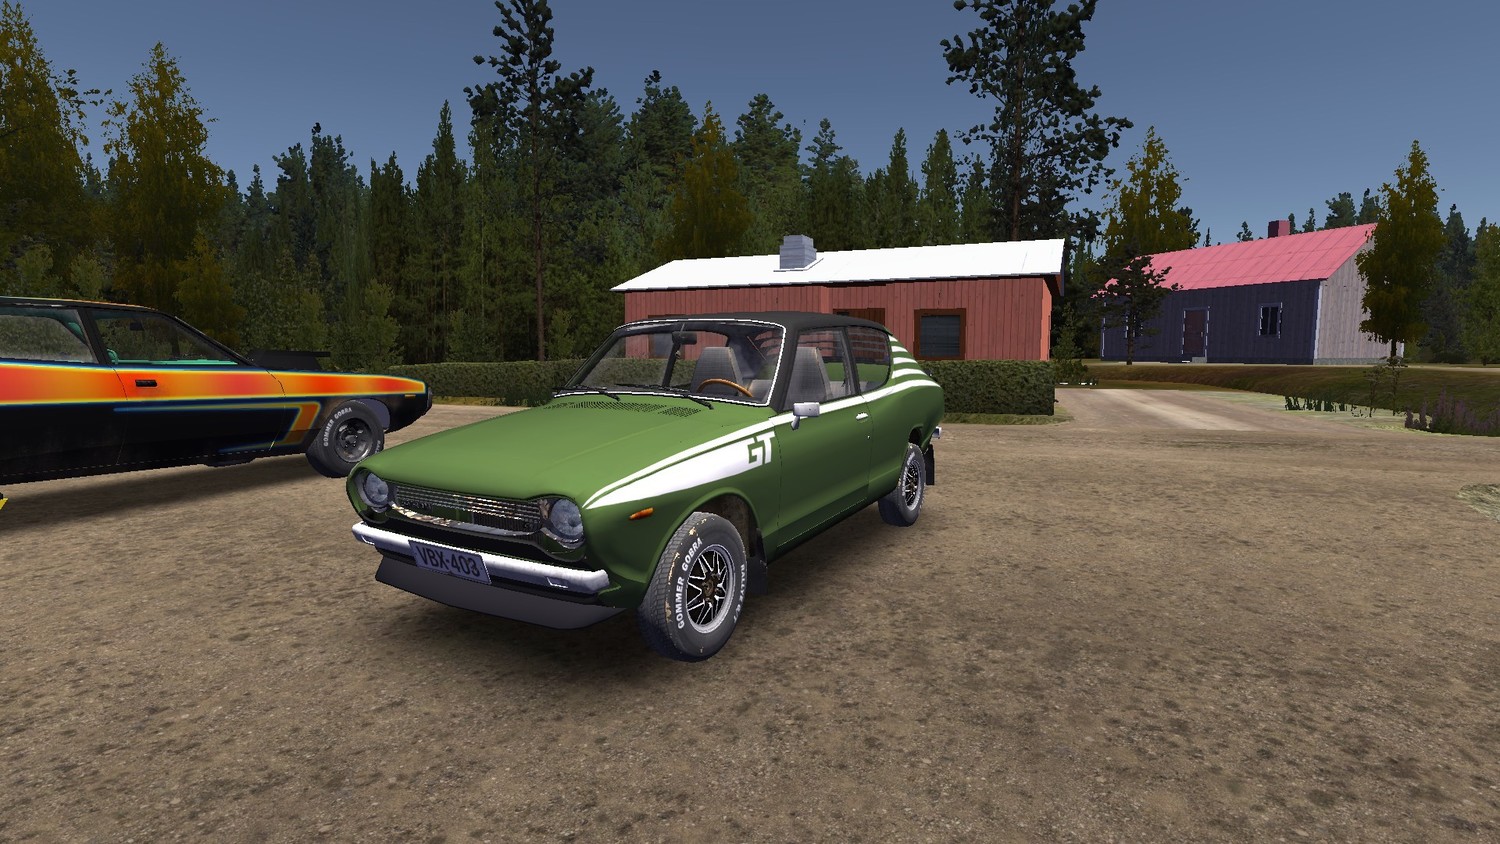 My Summer Car: SaveGame (green GT Satsuma and 400k marks for a quick start)